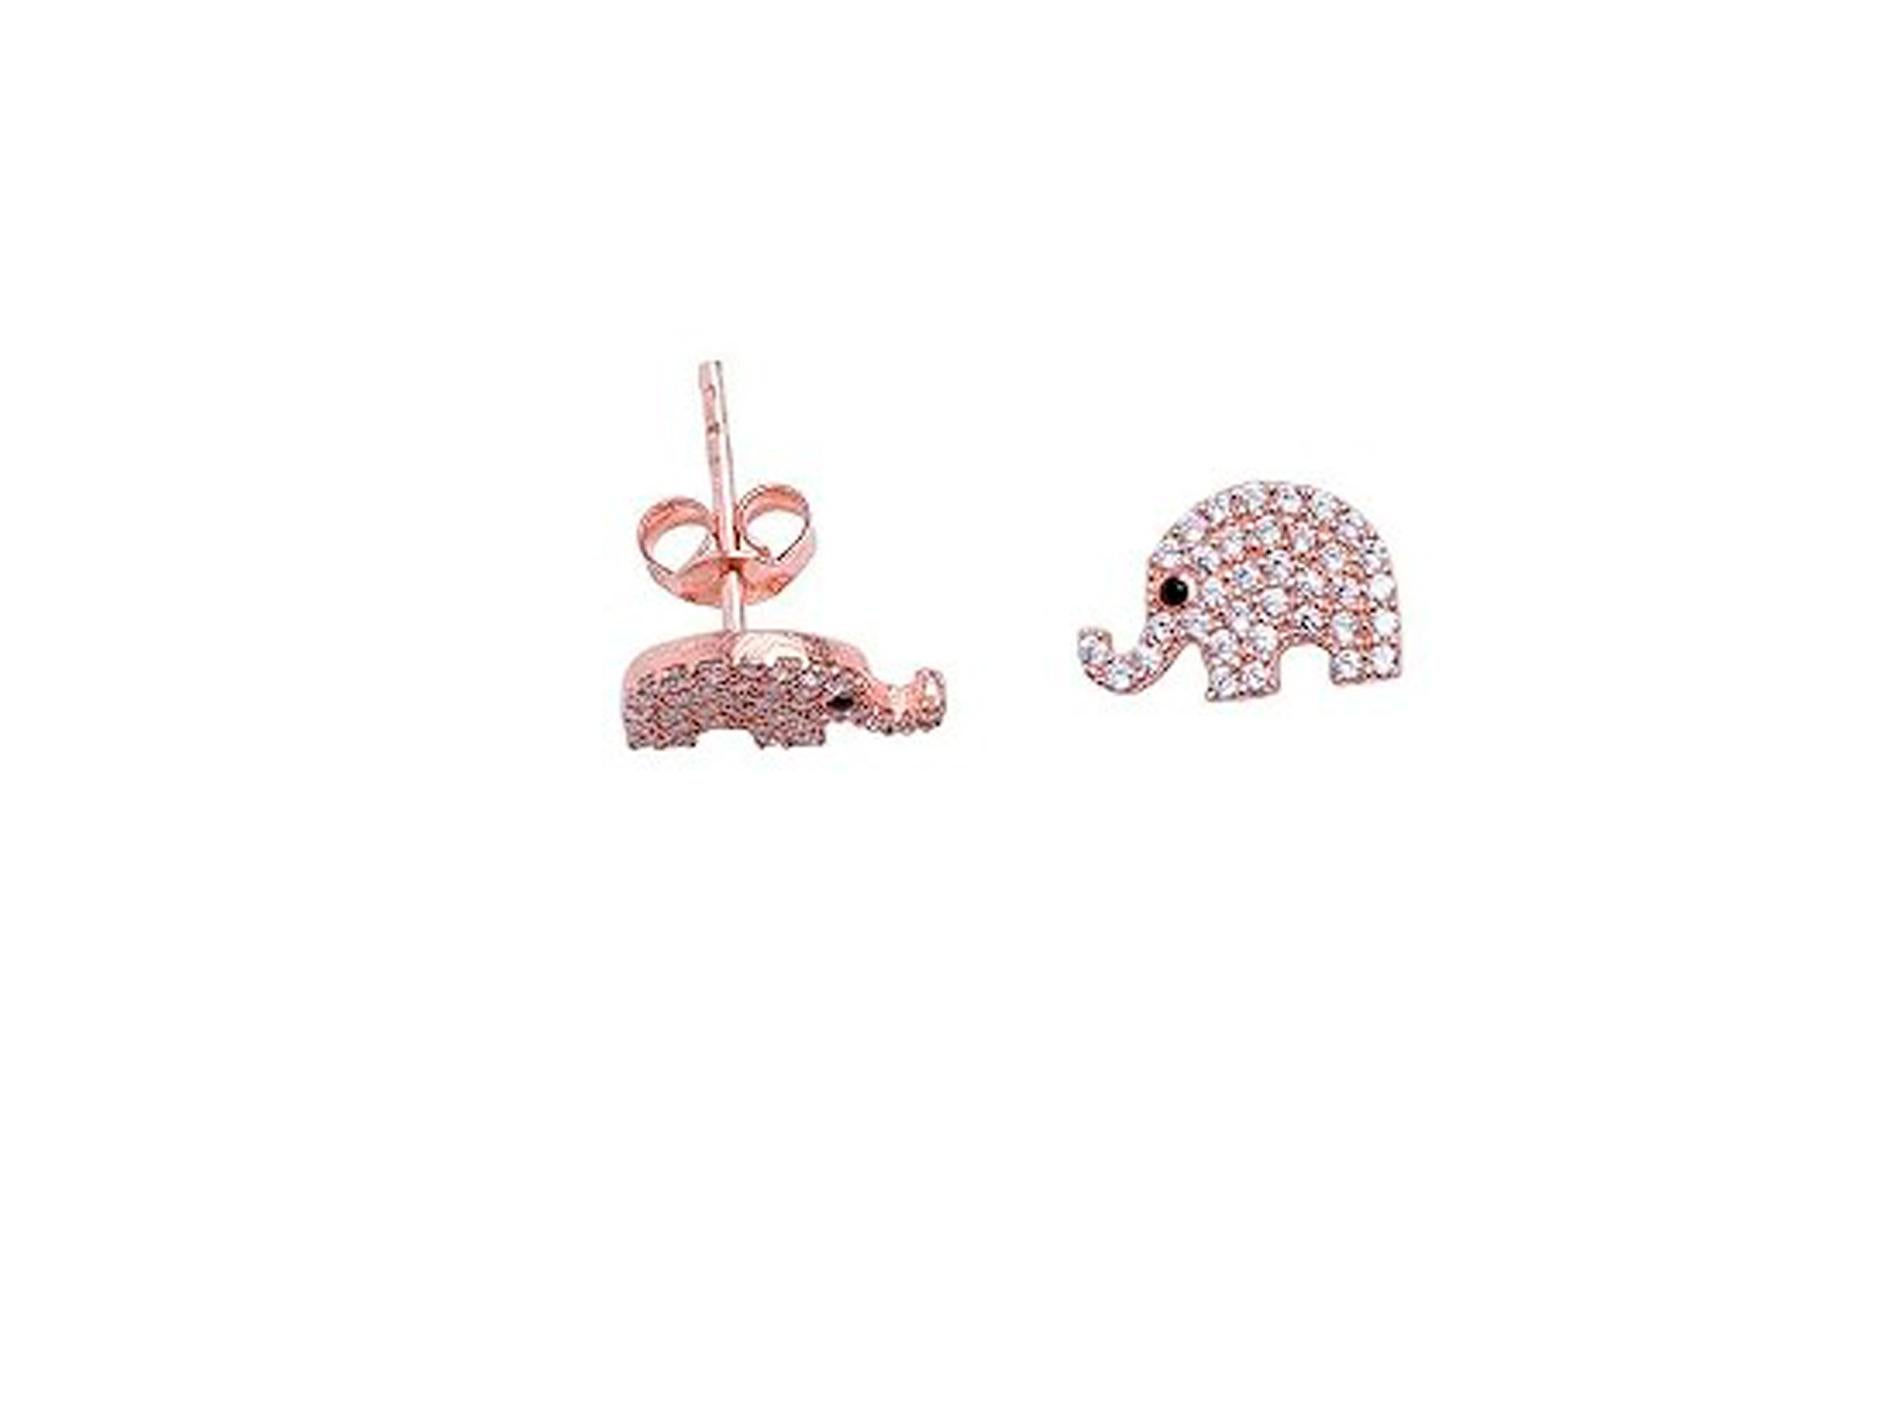 Round Cut Elephant earrings studs in 14k gold.  For Sale